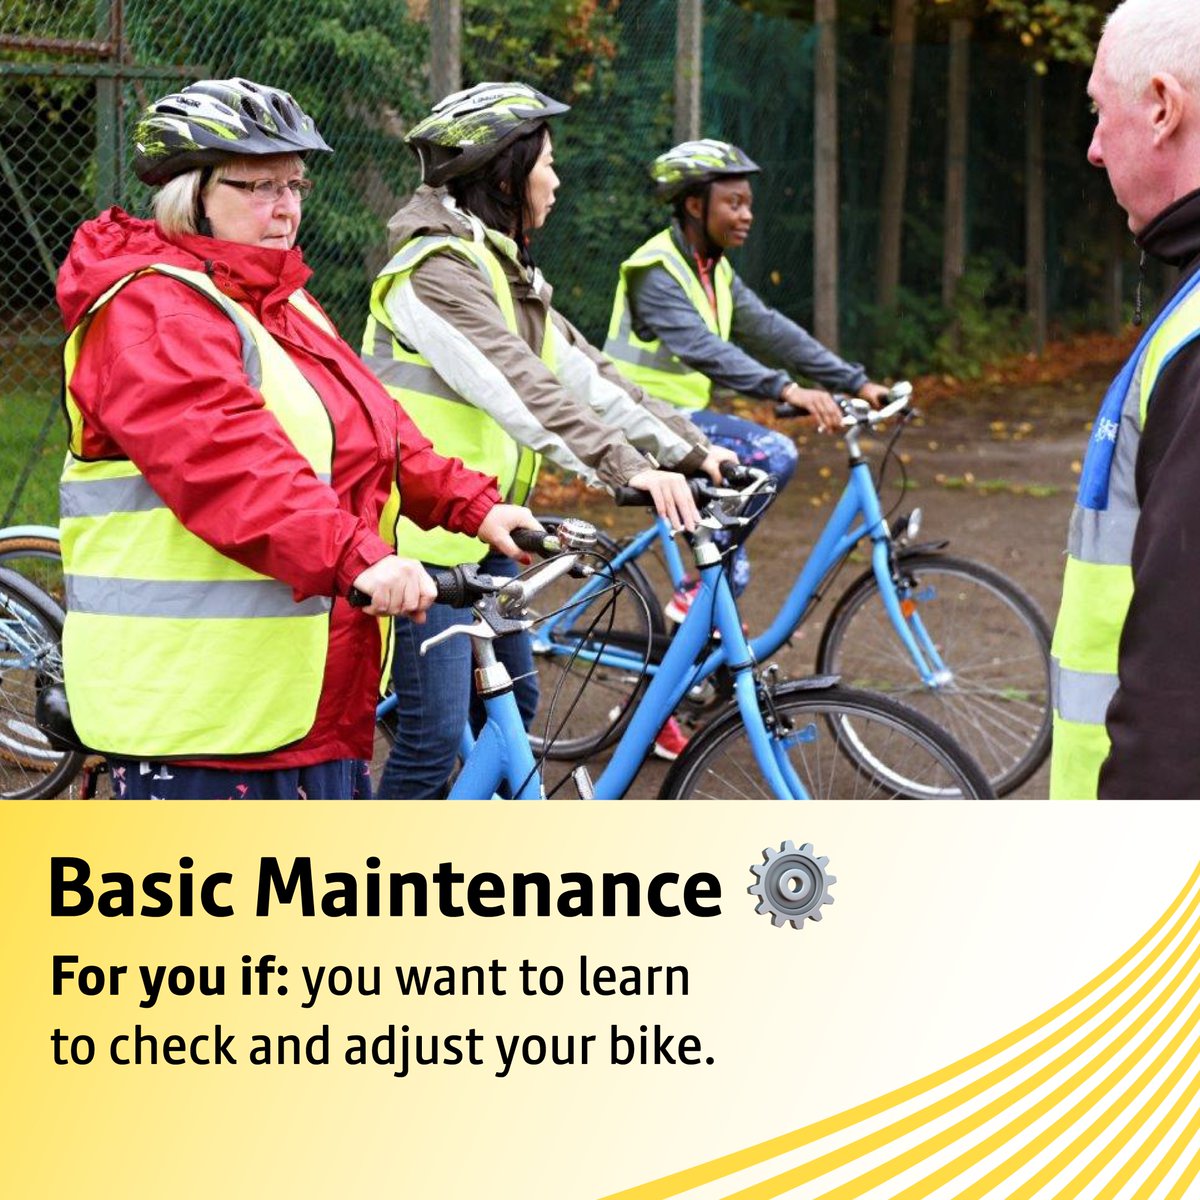 Fancy learning how to properly look after your bike? Book on to our basic maintenance course this Saturday at @BikeRightUK now and your bike will love you for it! 🚴 Interested? Click the link below to sign up 👇 cycletraining.tfgm.com/PublicBooking/… @ManCityCouncil @MCRActive